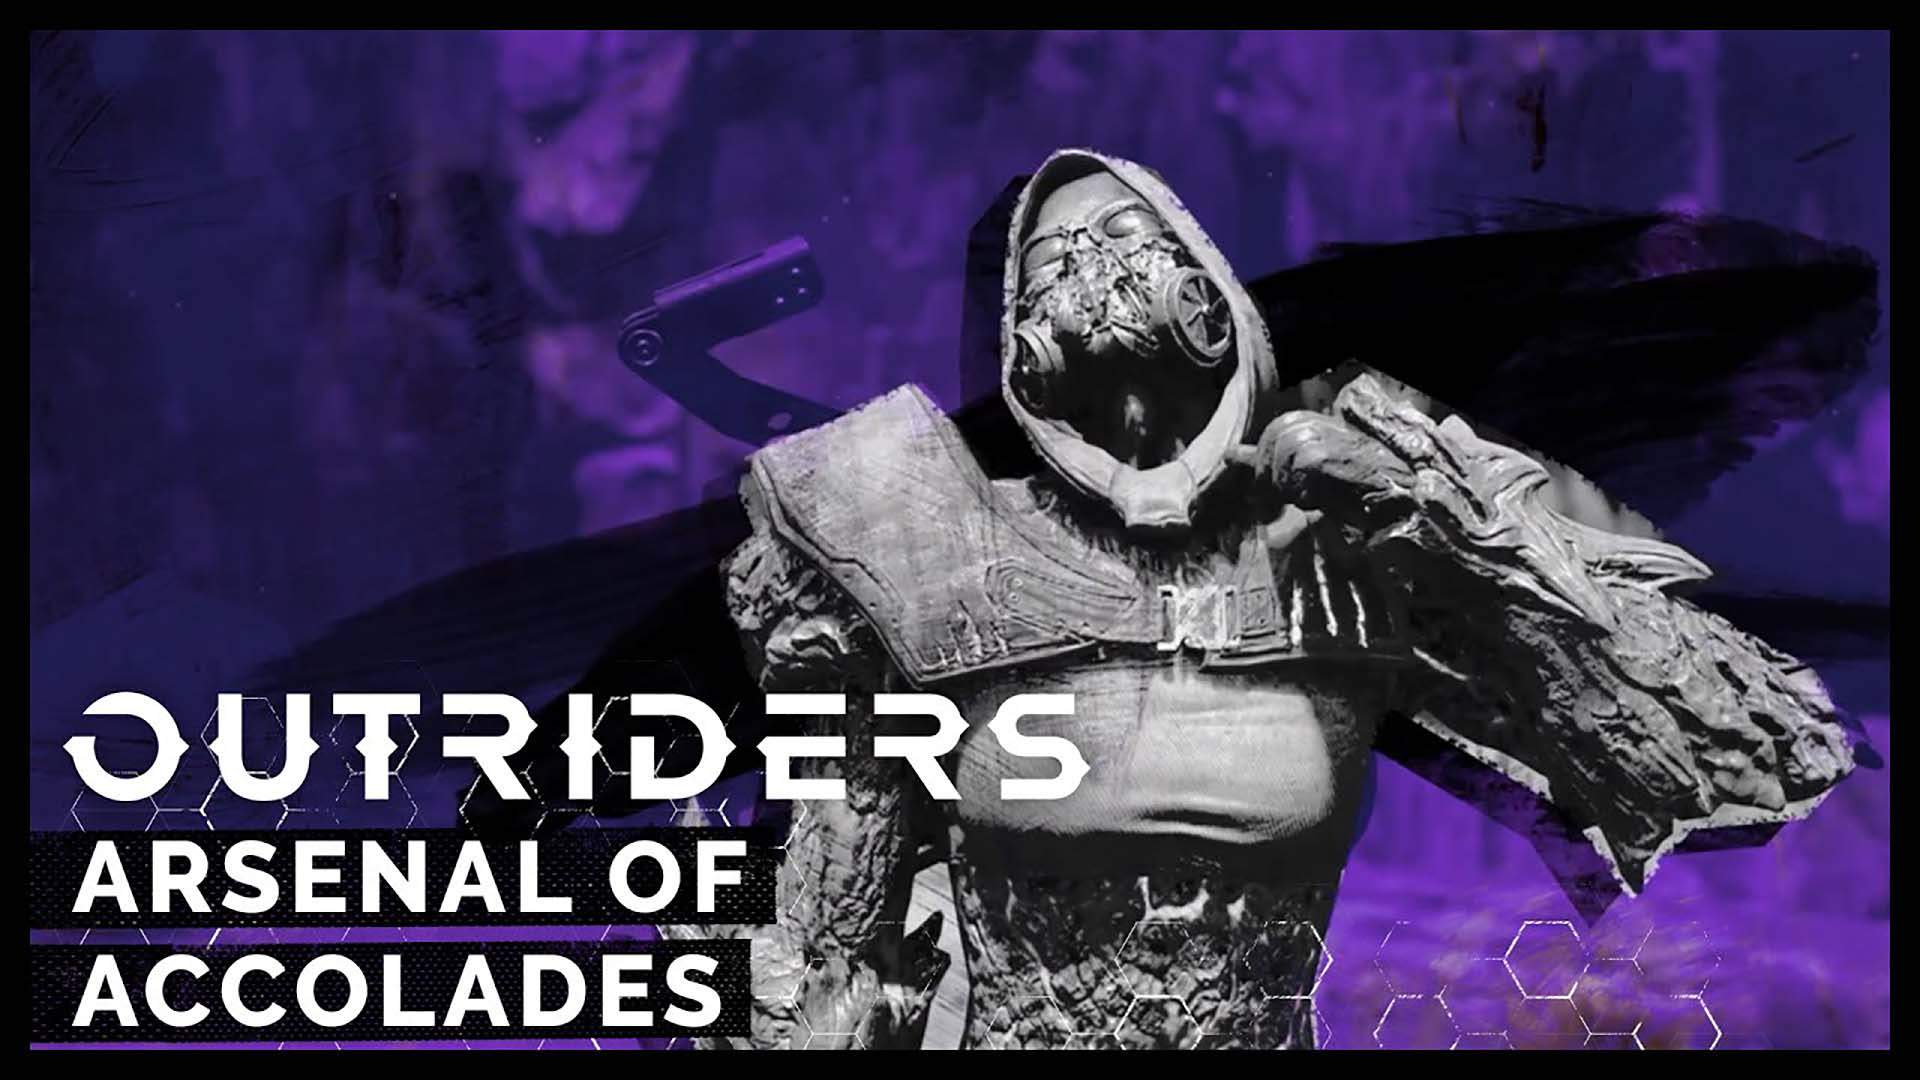 OUTRIDERS: Arsenal of Accolades trailer